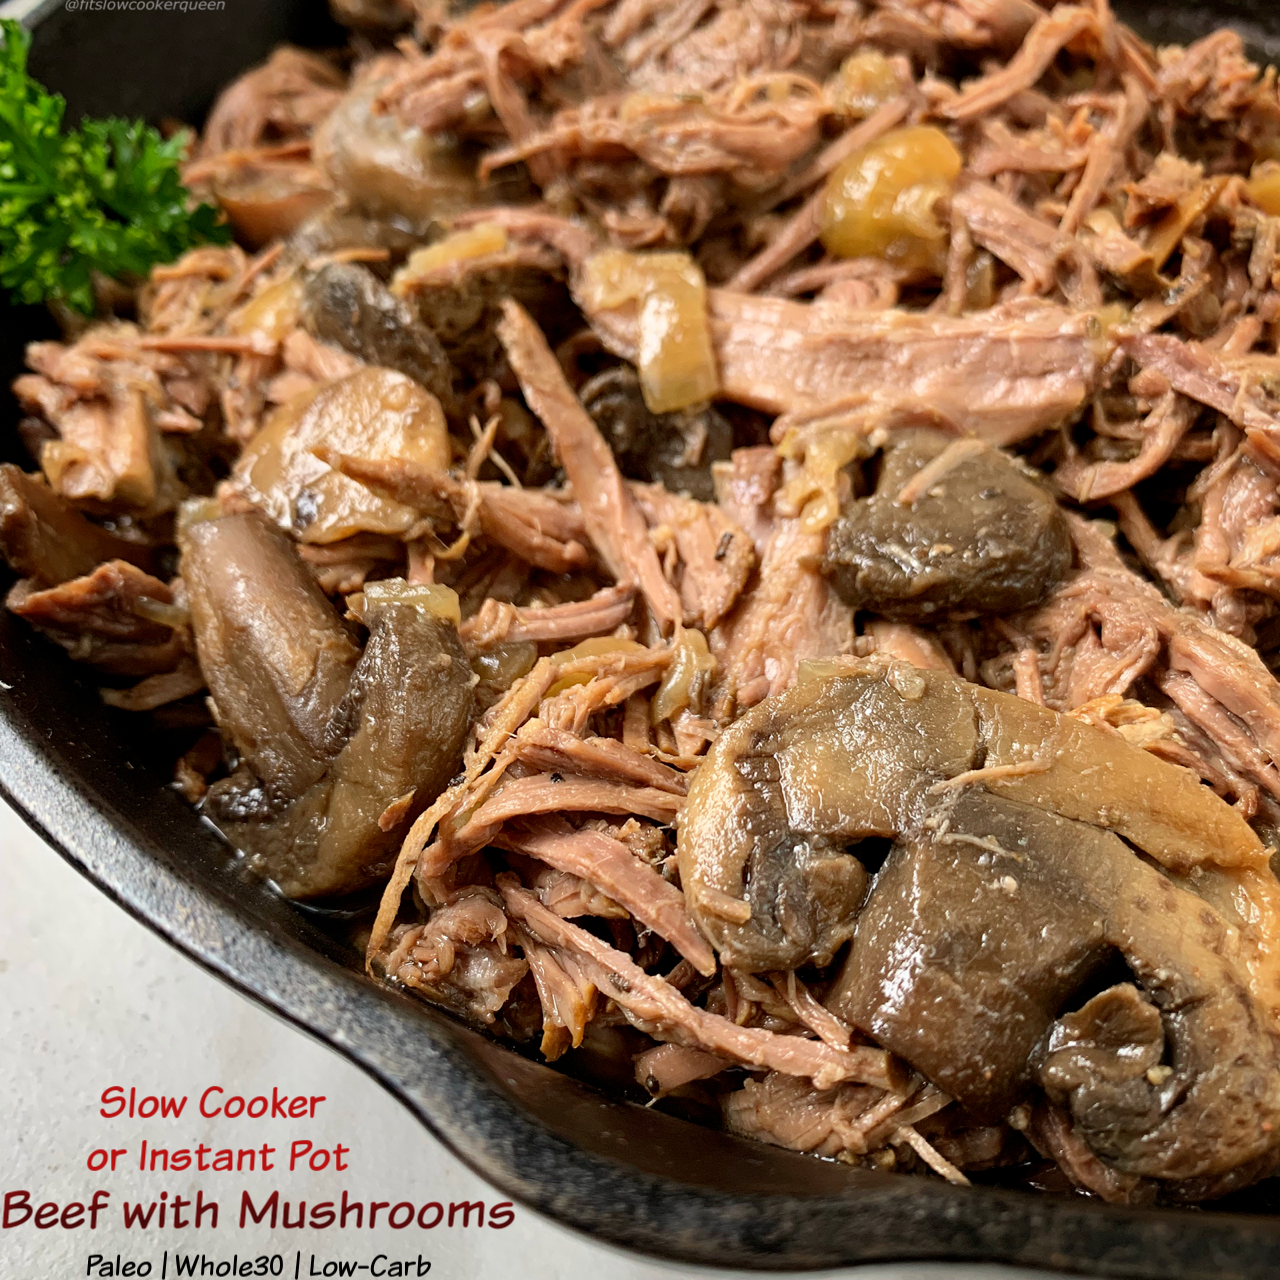 Beef slow cooks with mushrooms for a healthy meal the entire family will enjoy. Make this paleo, whole30, low-carb roast in your slow cooker or Instant Pot!